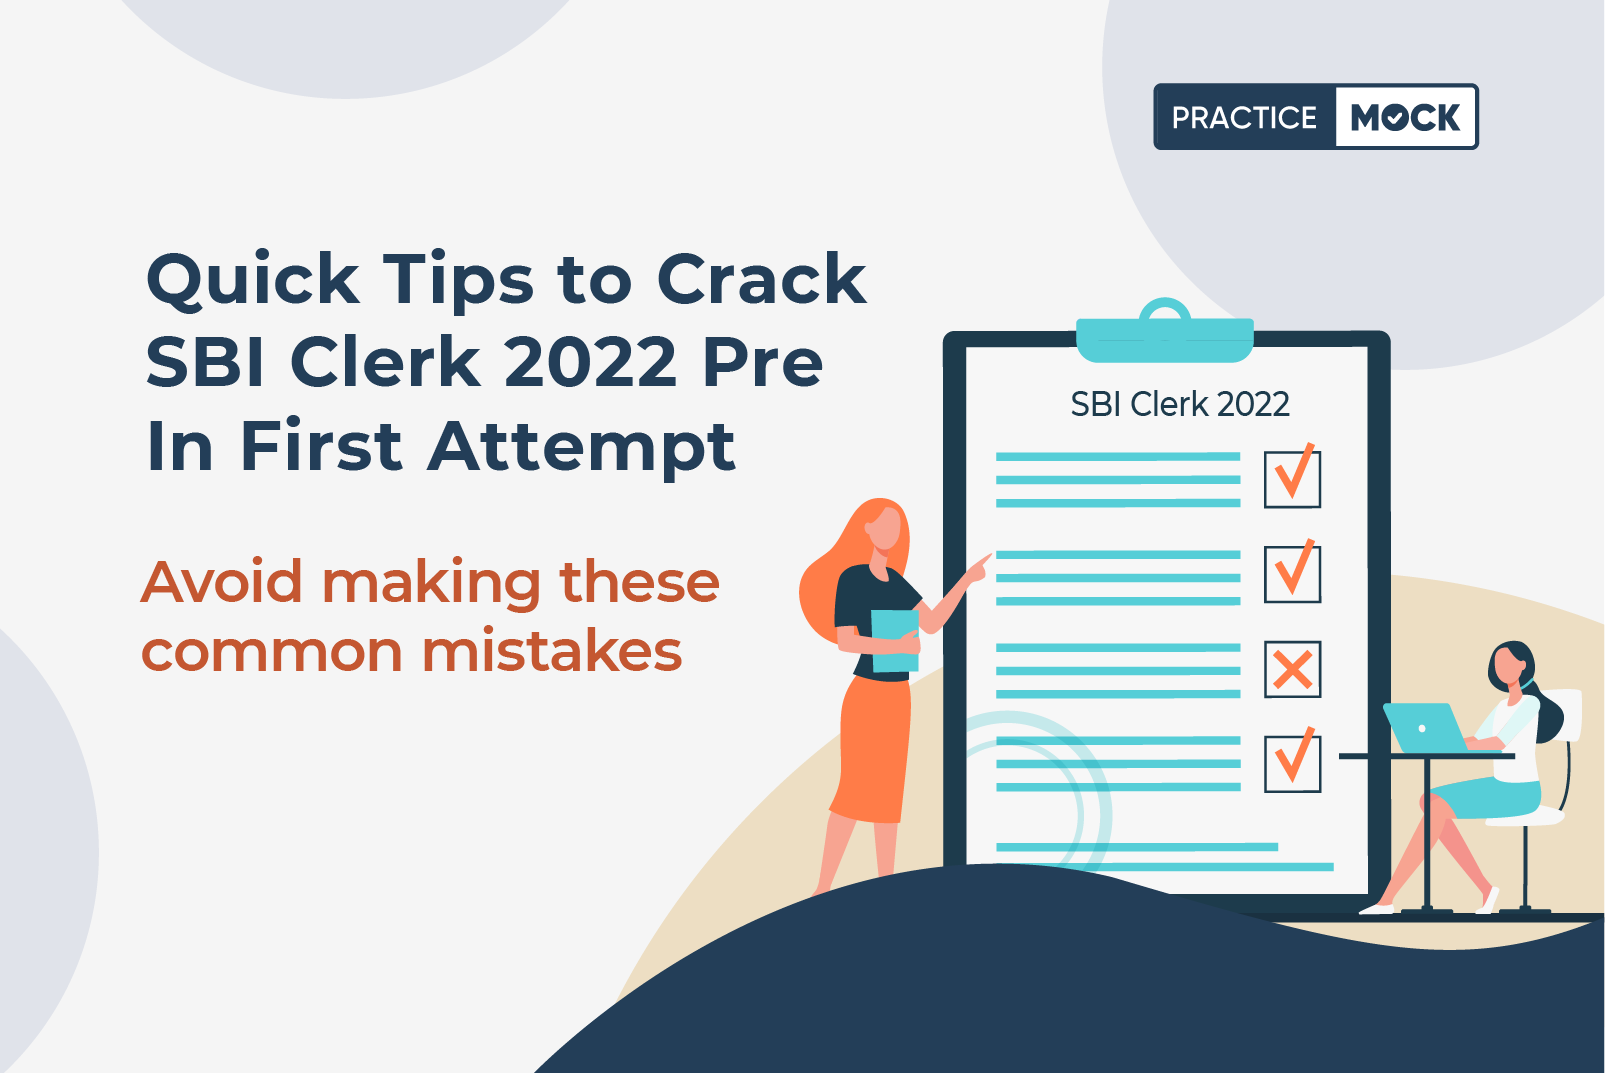 Quick Tips to Crack SBI Clerk 2022 Pre in 1st attempt